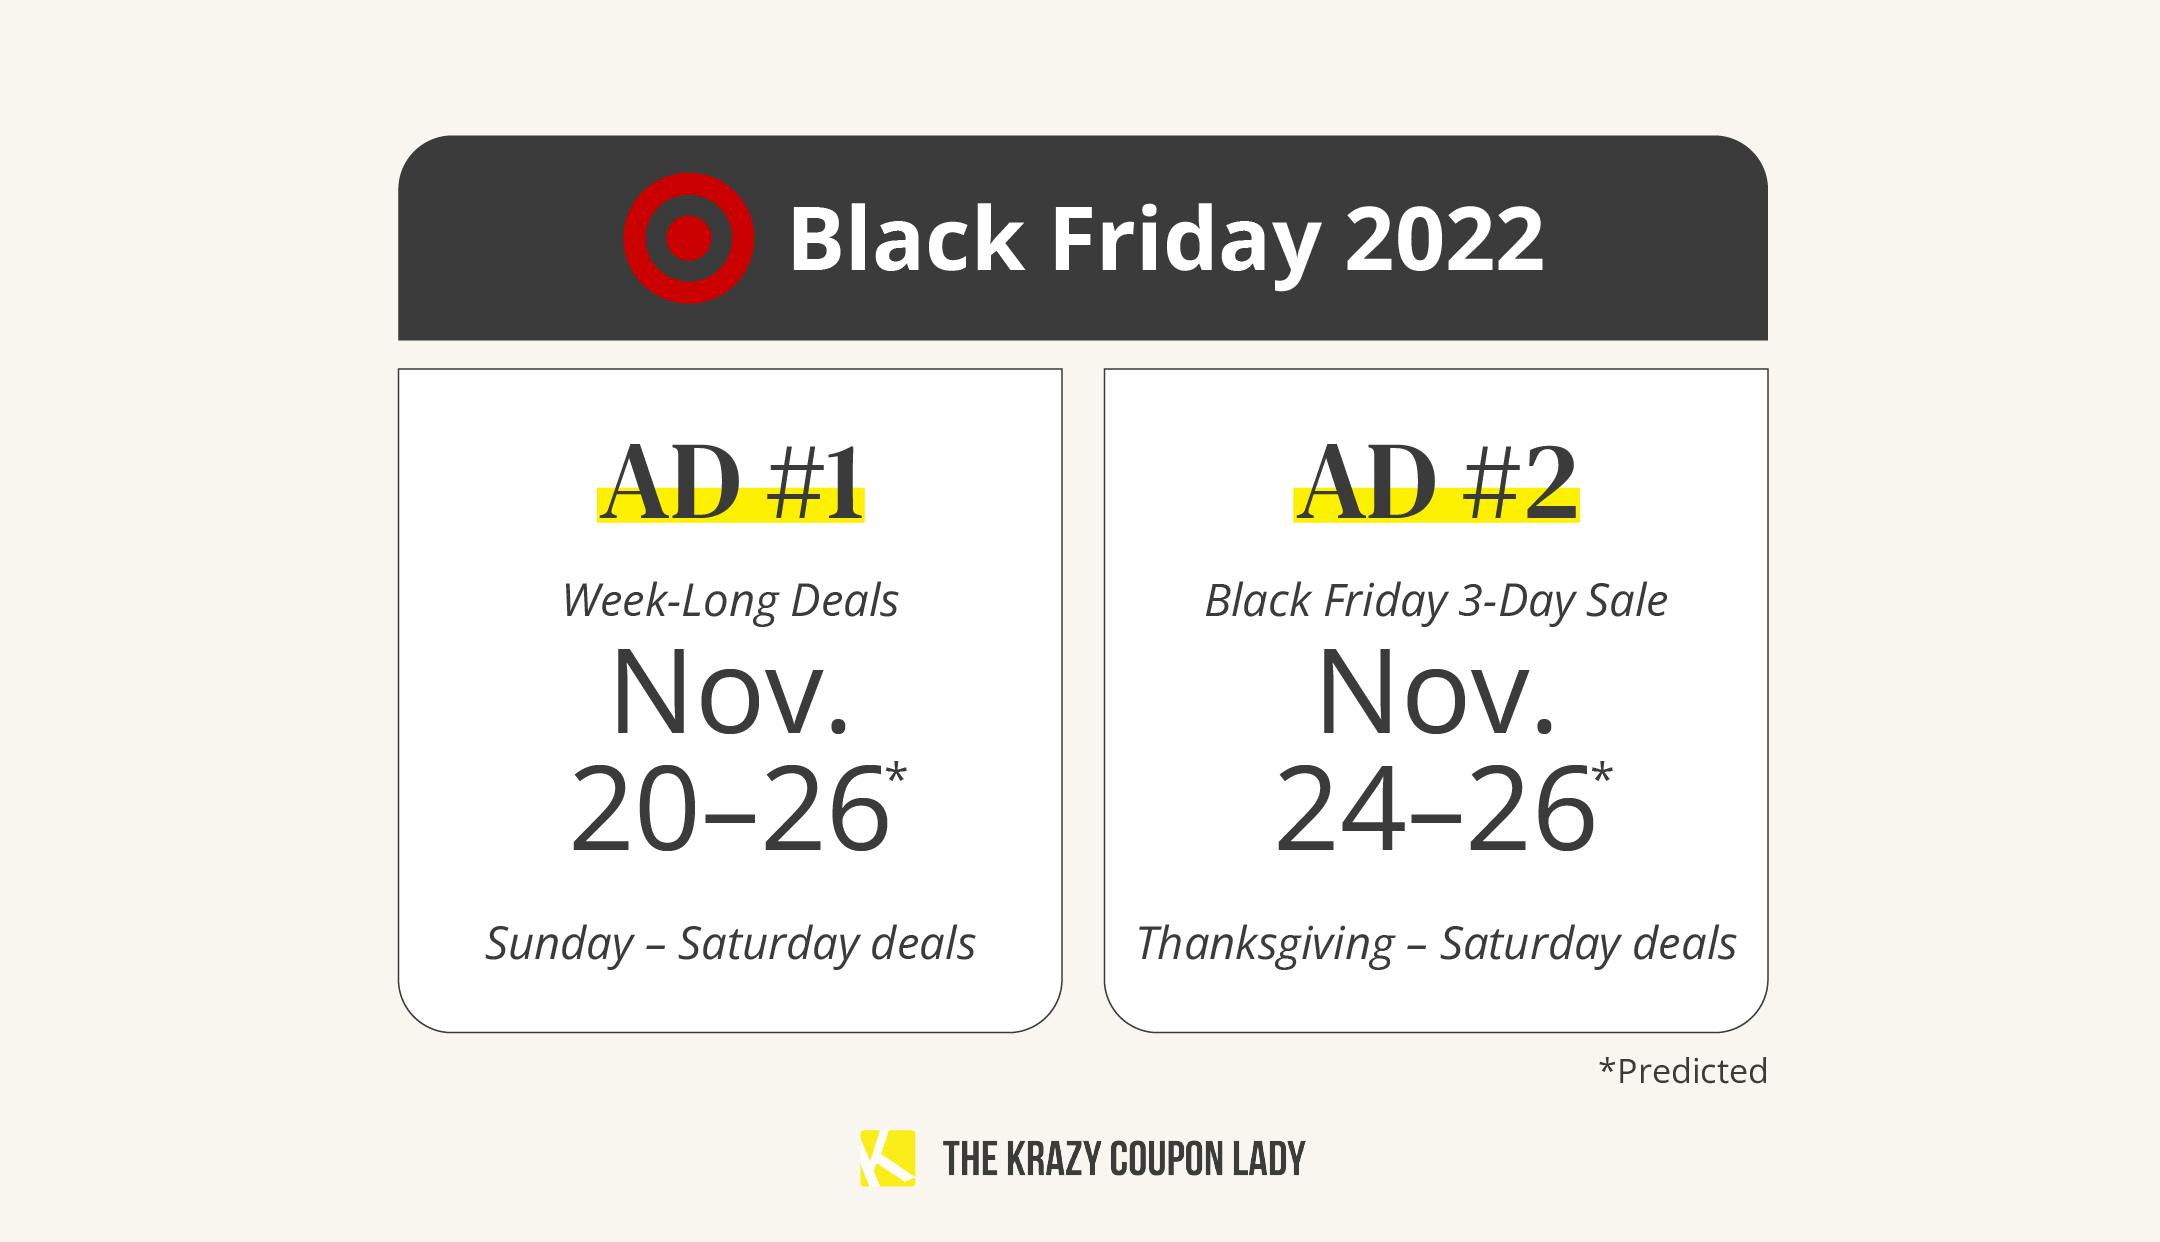 Chart showing the two dates for Target Black Friday 2022 ads, which are Nov. 20-26 and Nov. 24-26.